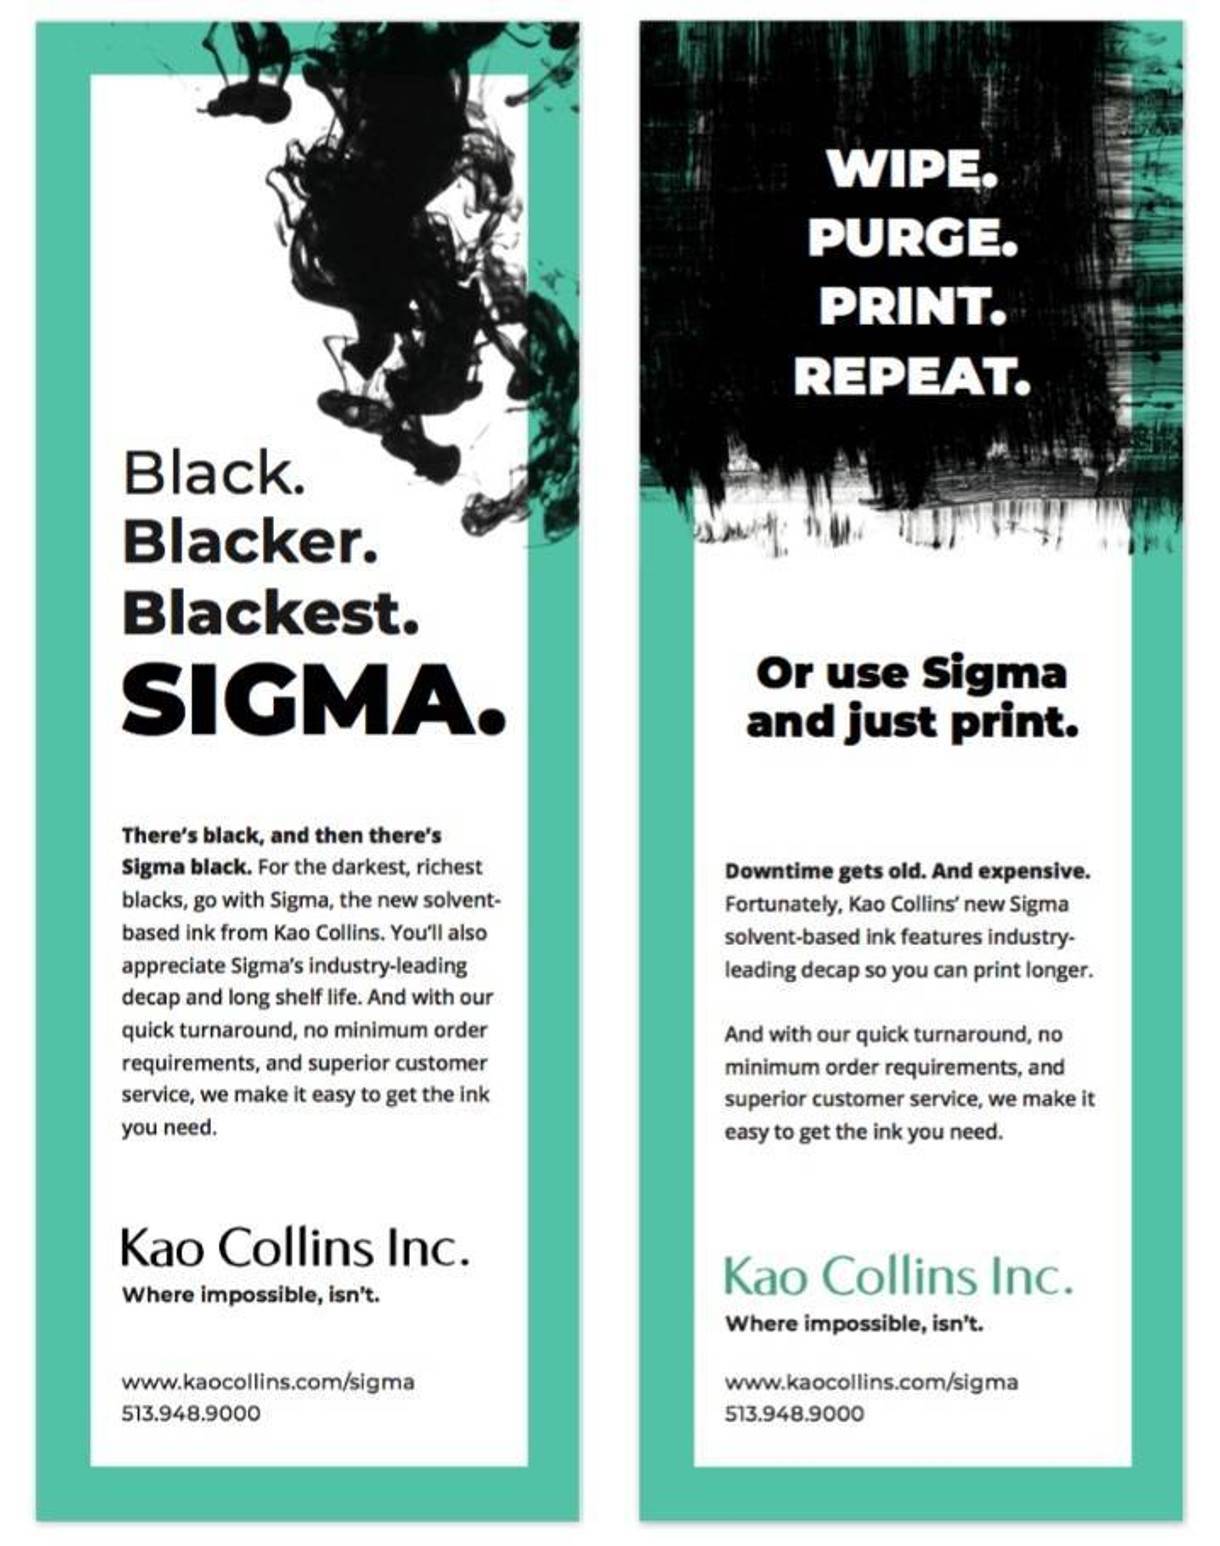 examples of our award winning b2b integrated marketing campaign for Sigma ink